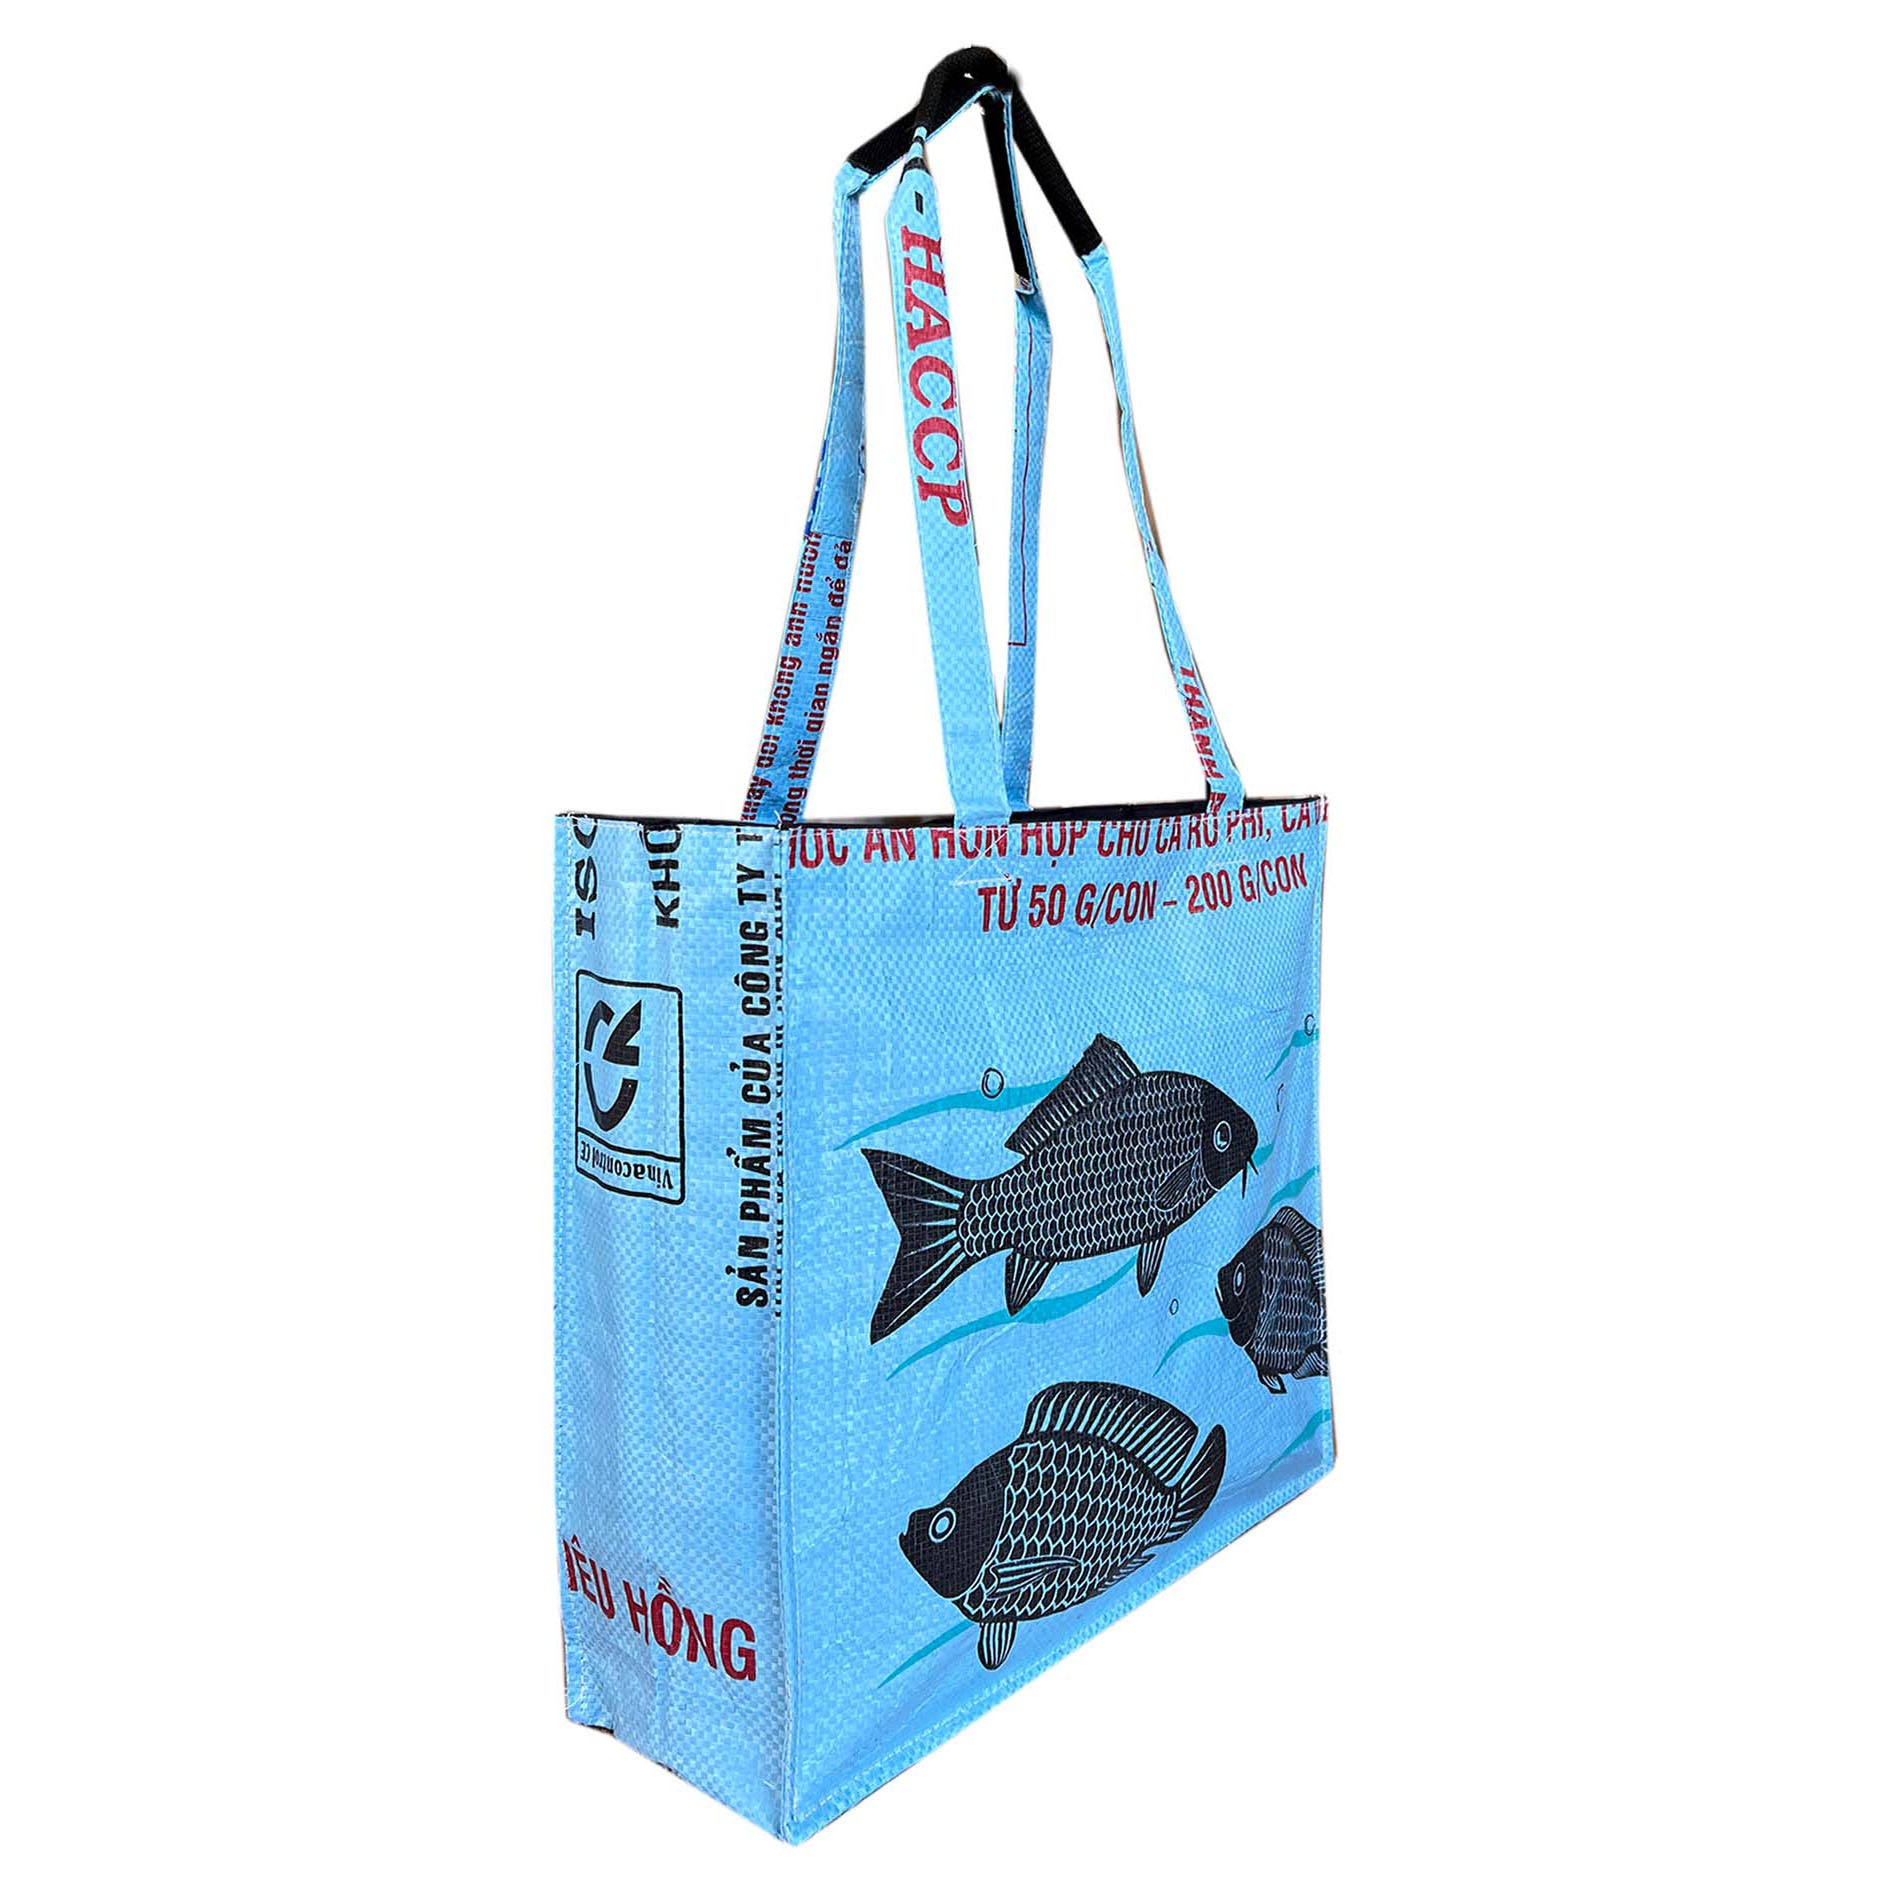 Recycled material tote bags with animal prints with pockets and zip